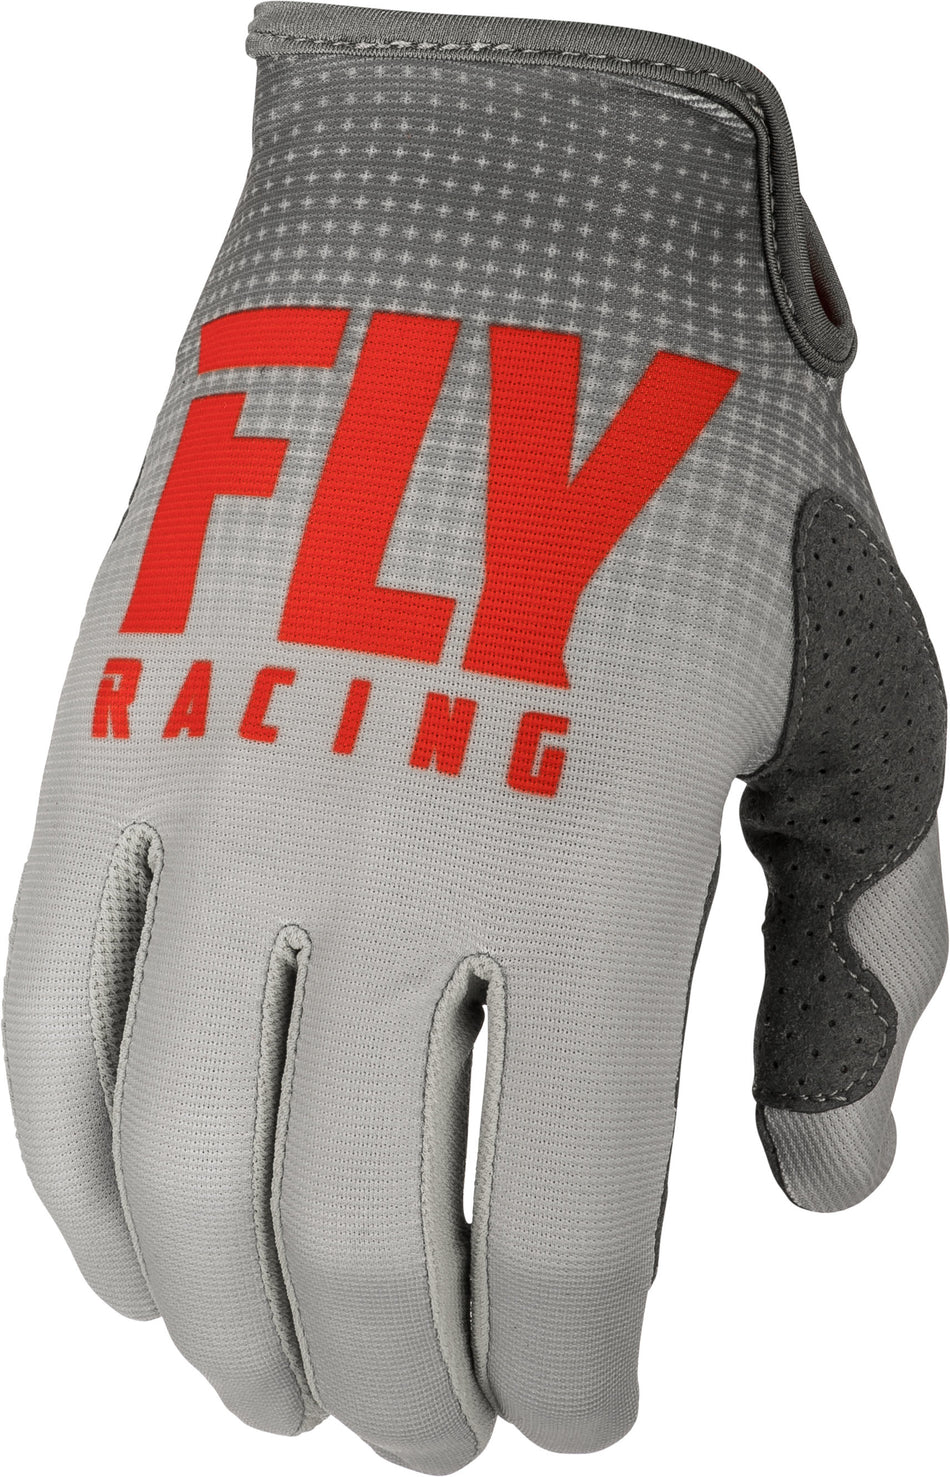 FLY RACING Lite Gloves Red/Grey Sz 11 372-01211